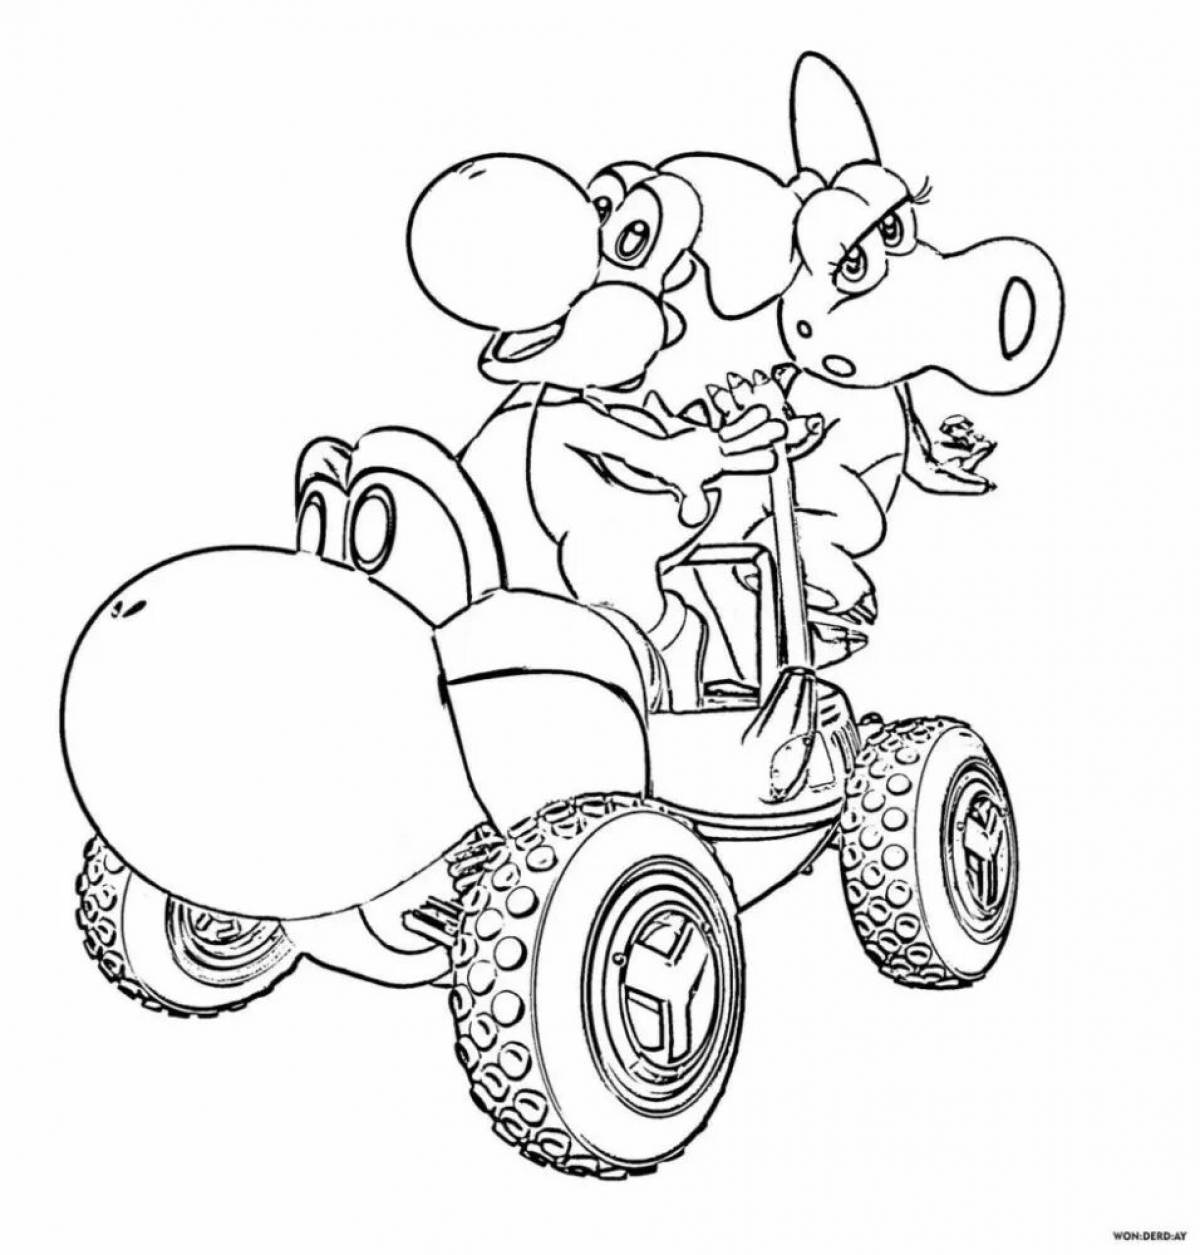 Adorable quad bike coloring book for kids